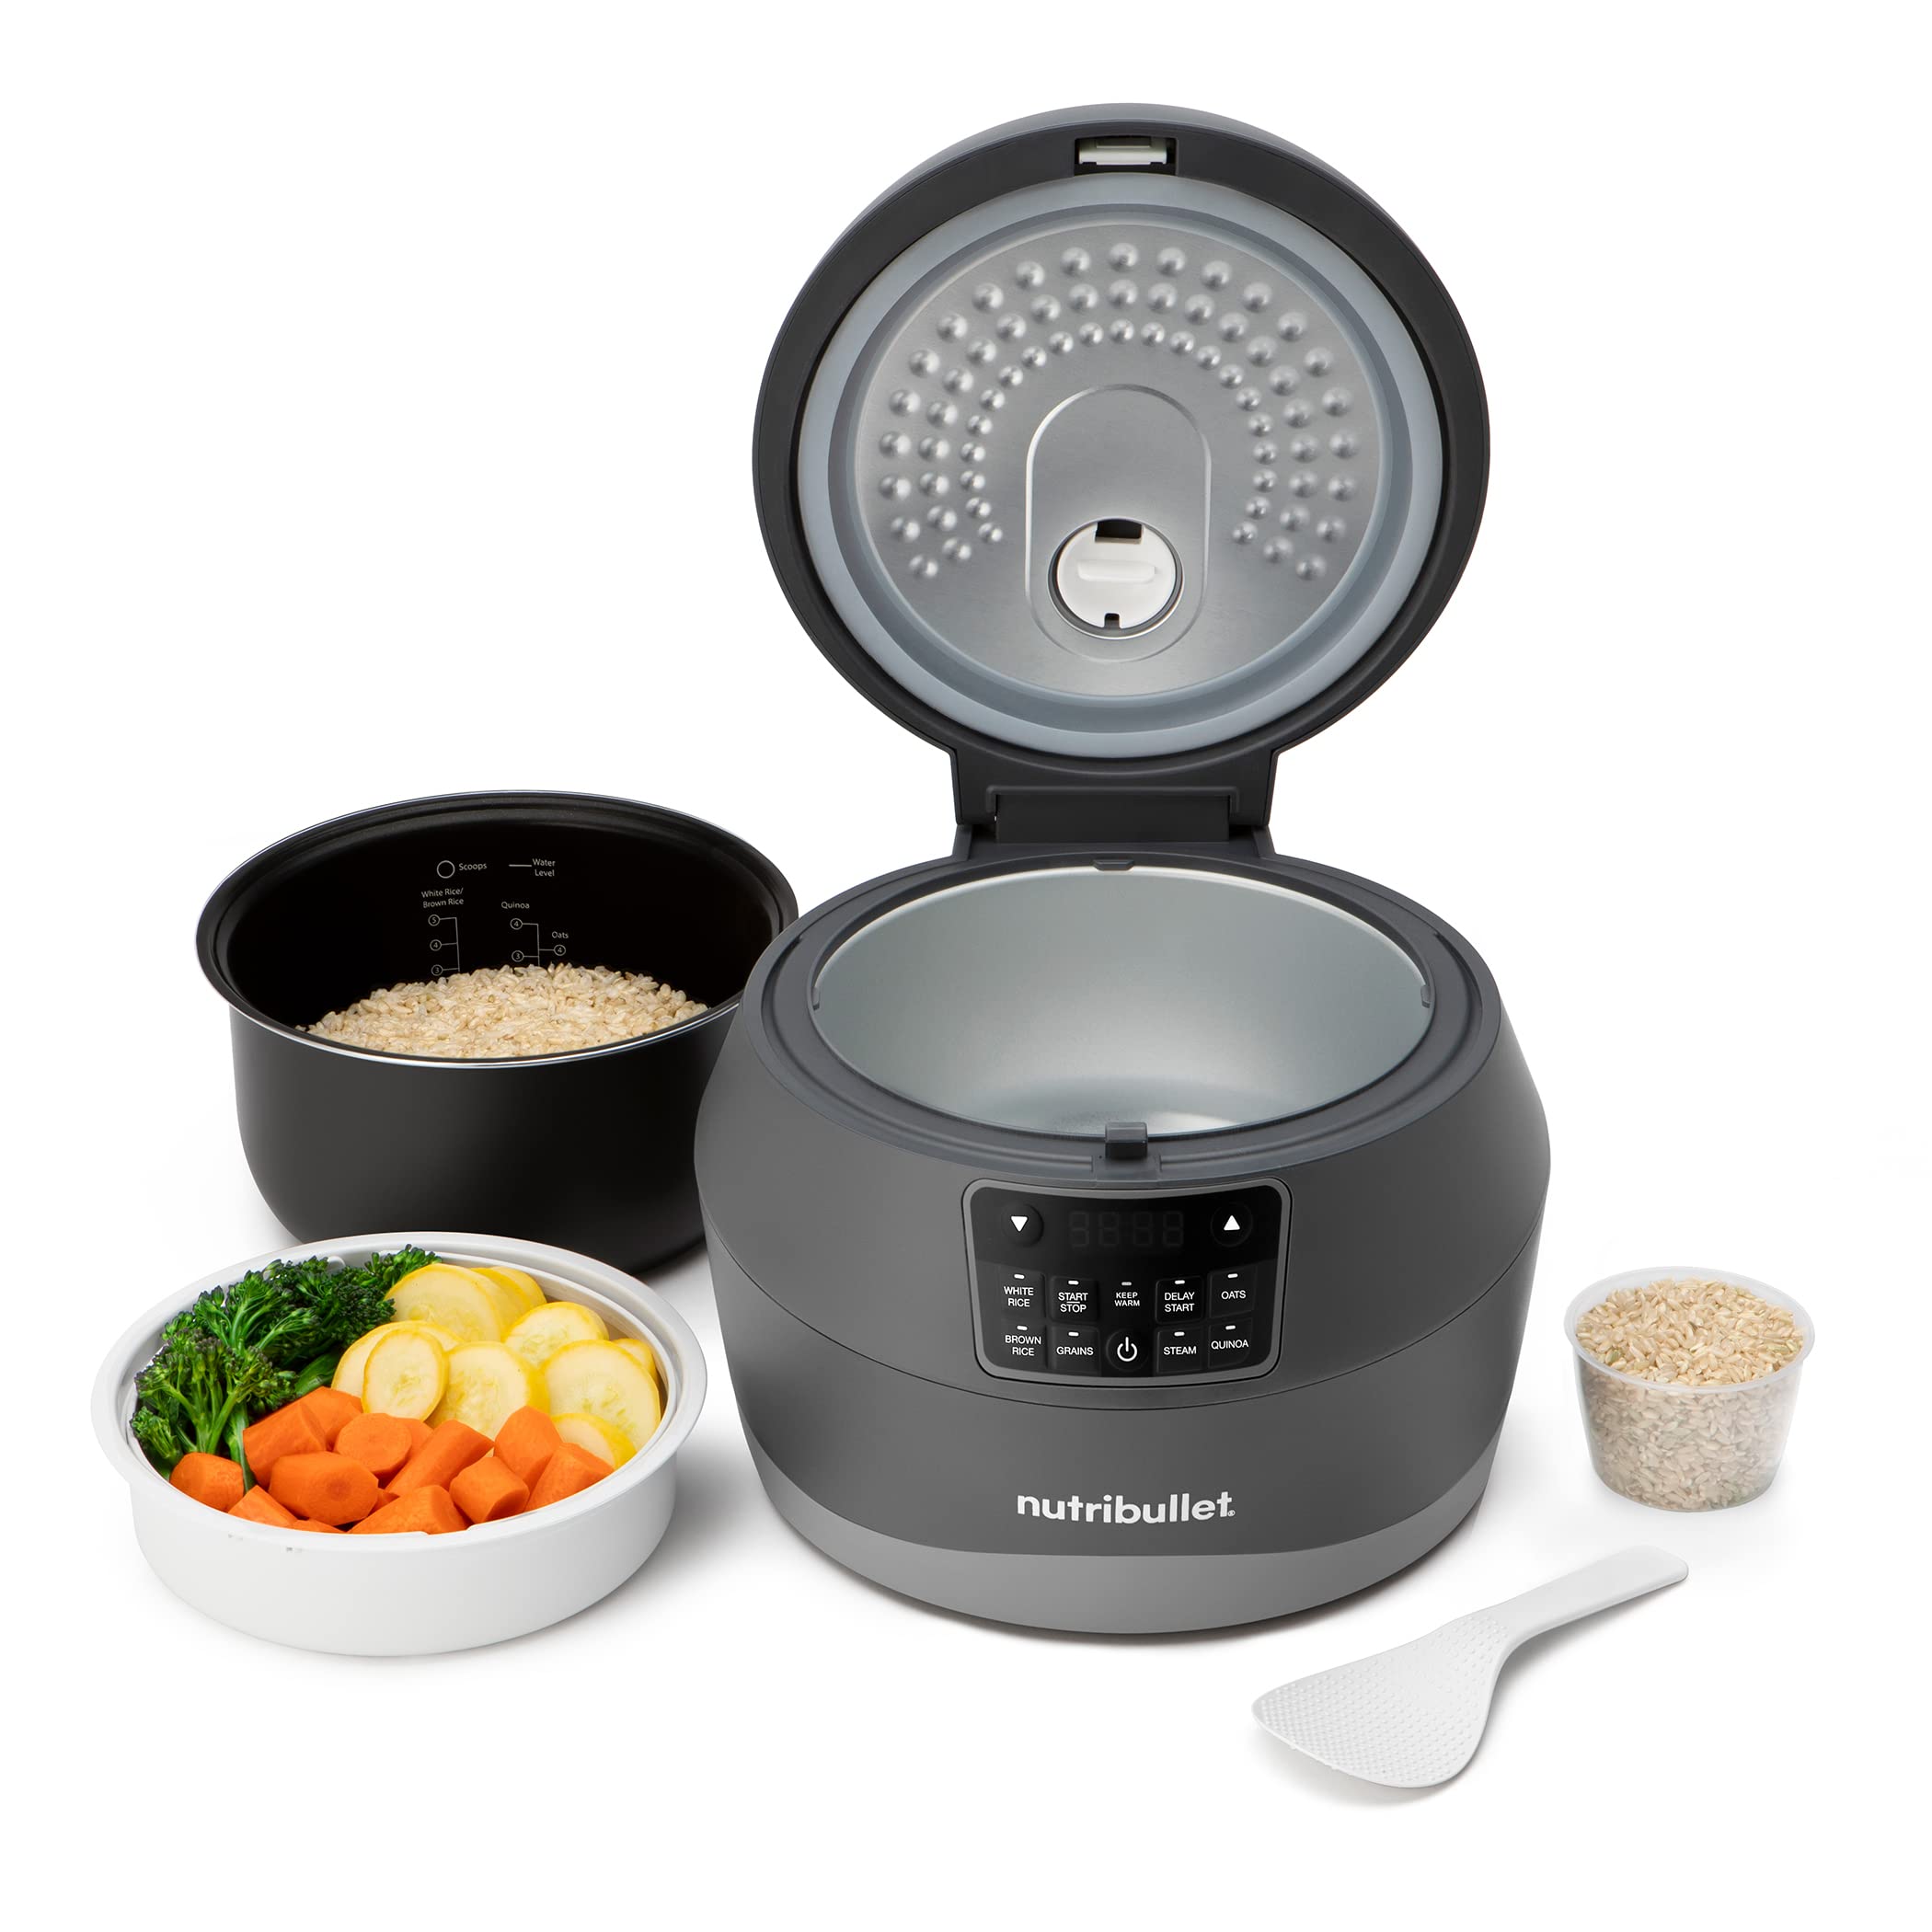 nutribullet EveryGrain Cooker w/ Steaming Basket (10-Cup) $64 + Free Shipping